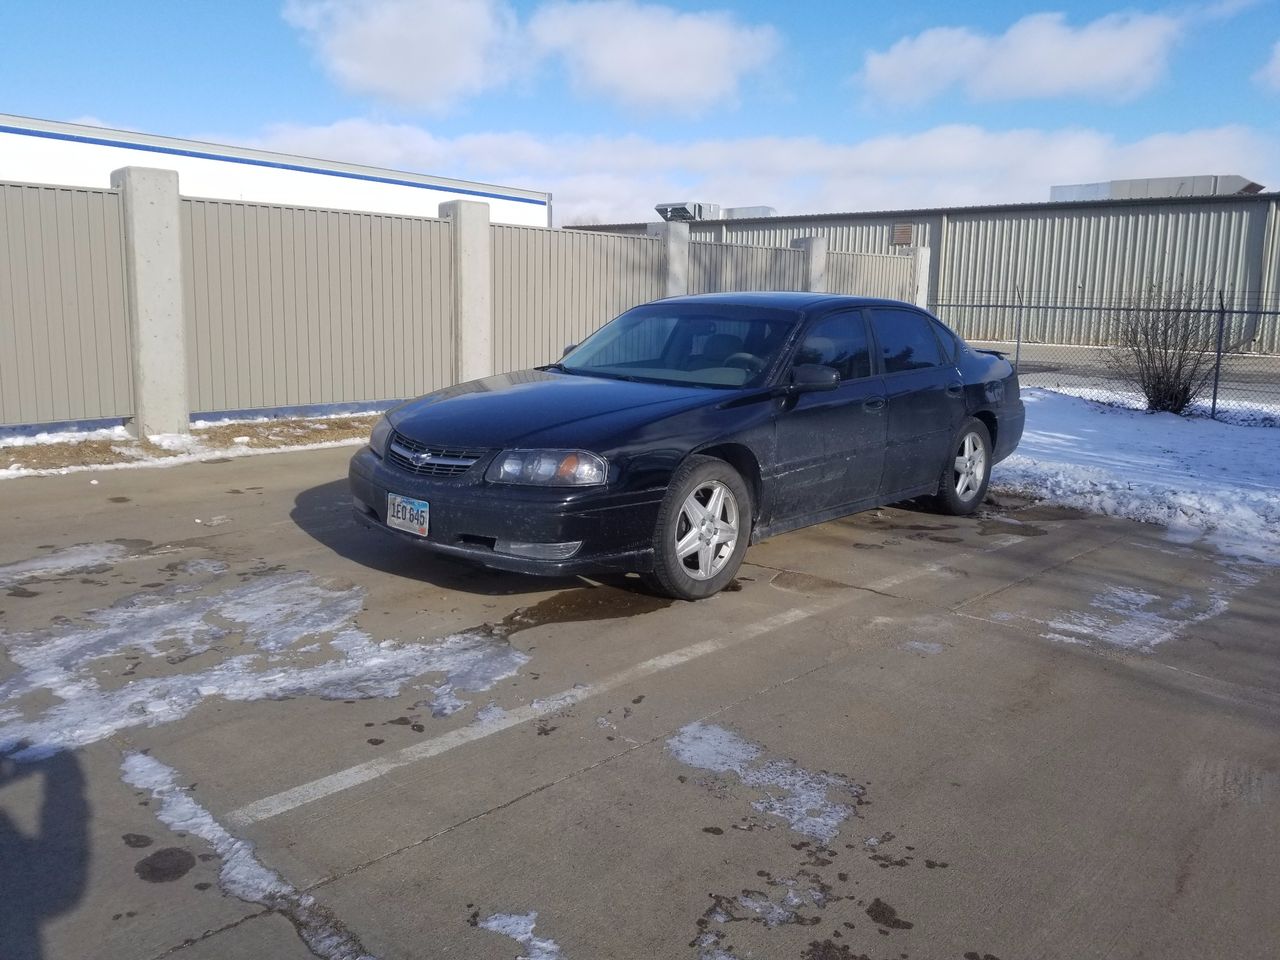 2004 Chevrolet Impala SS Supercharged | Sioux Falls, SD, Black (Black), Front Wheel